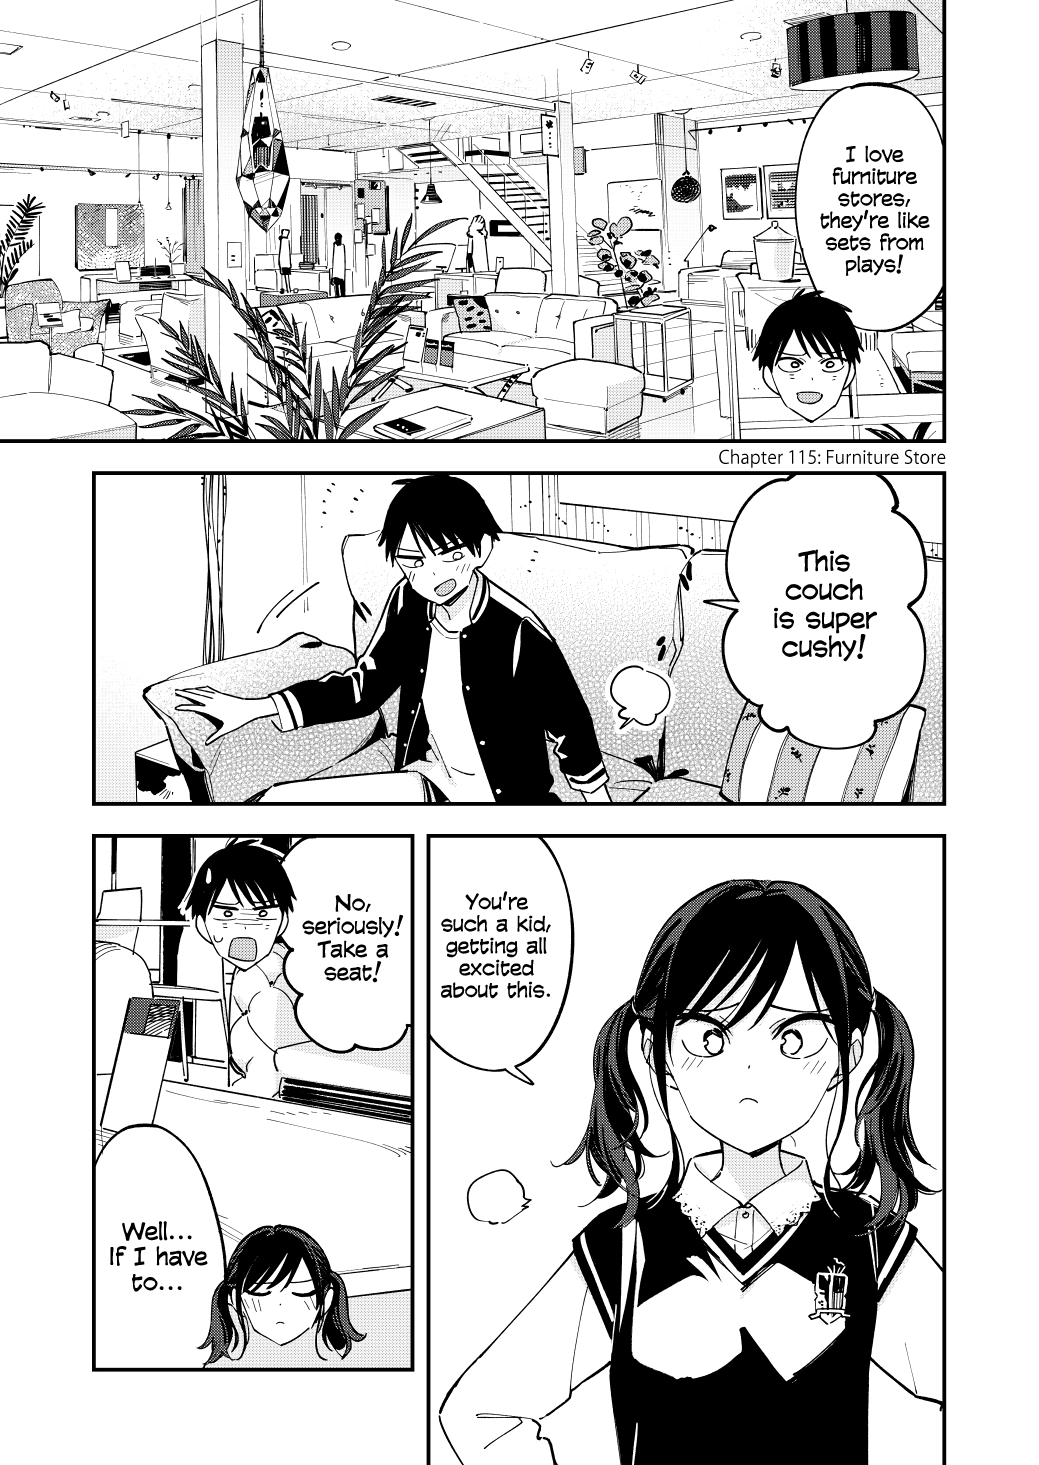 Pseudo Harem Vol.5 Chapter 115: Furniture Store - Picture 1